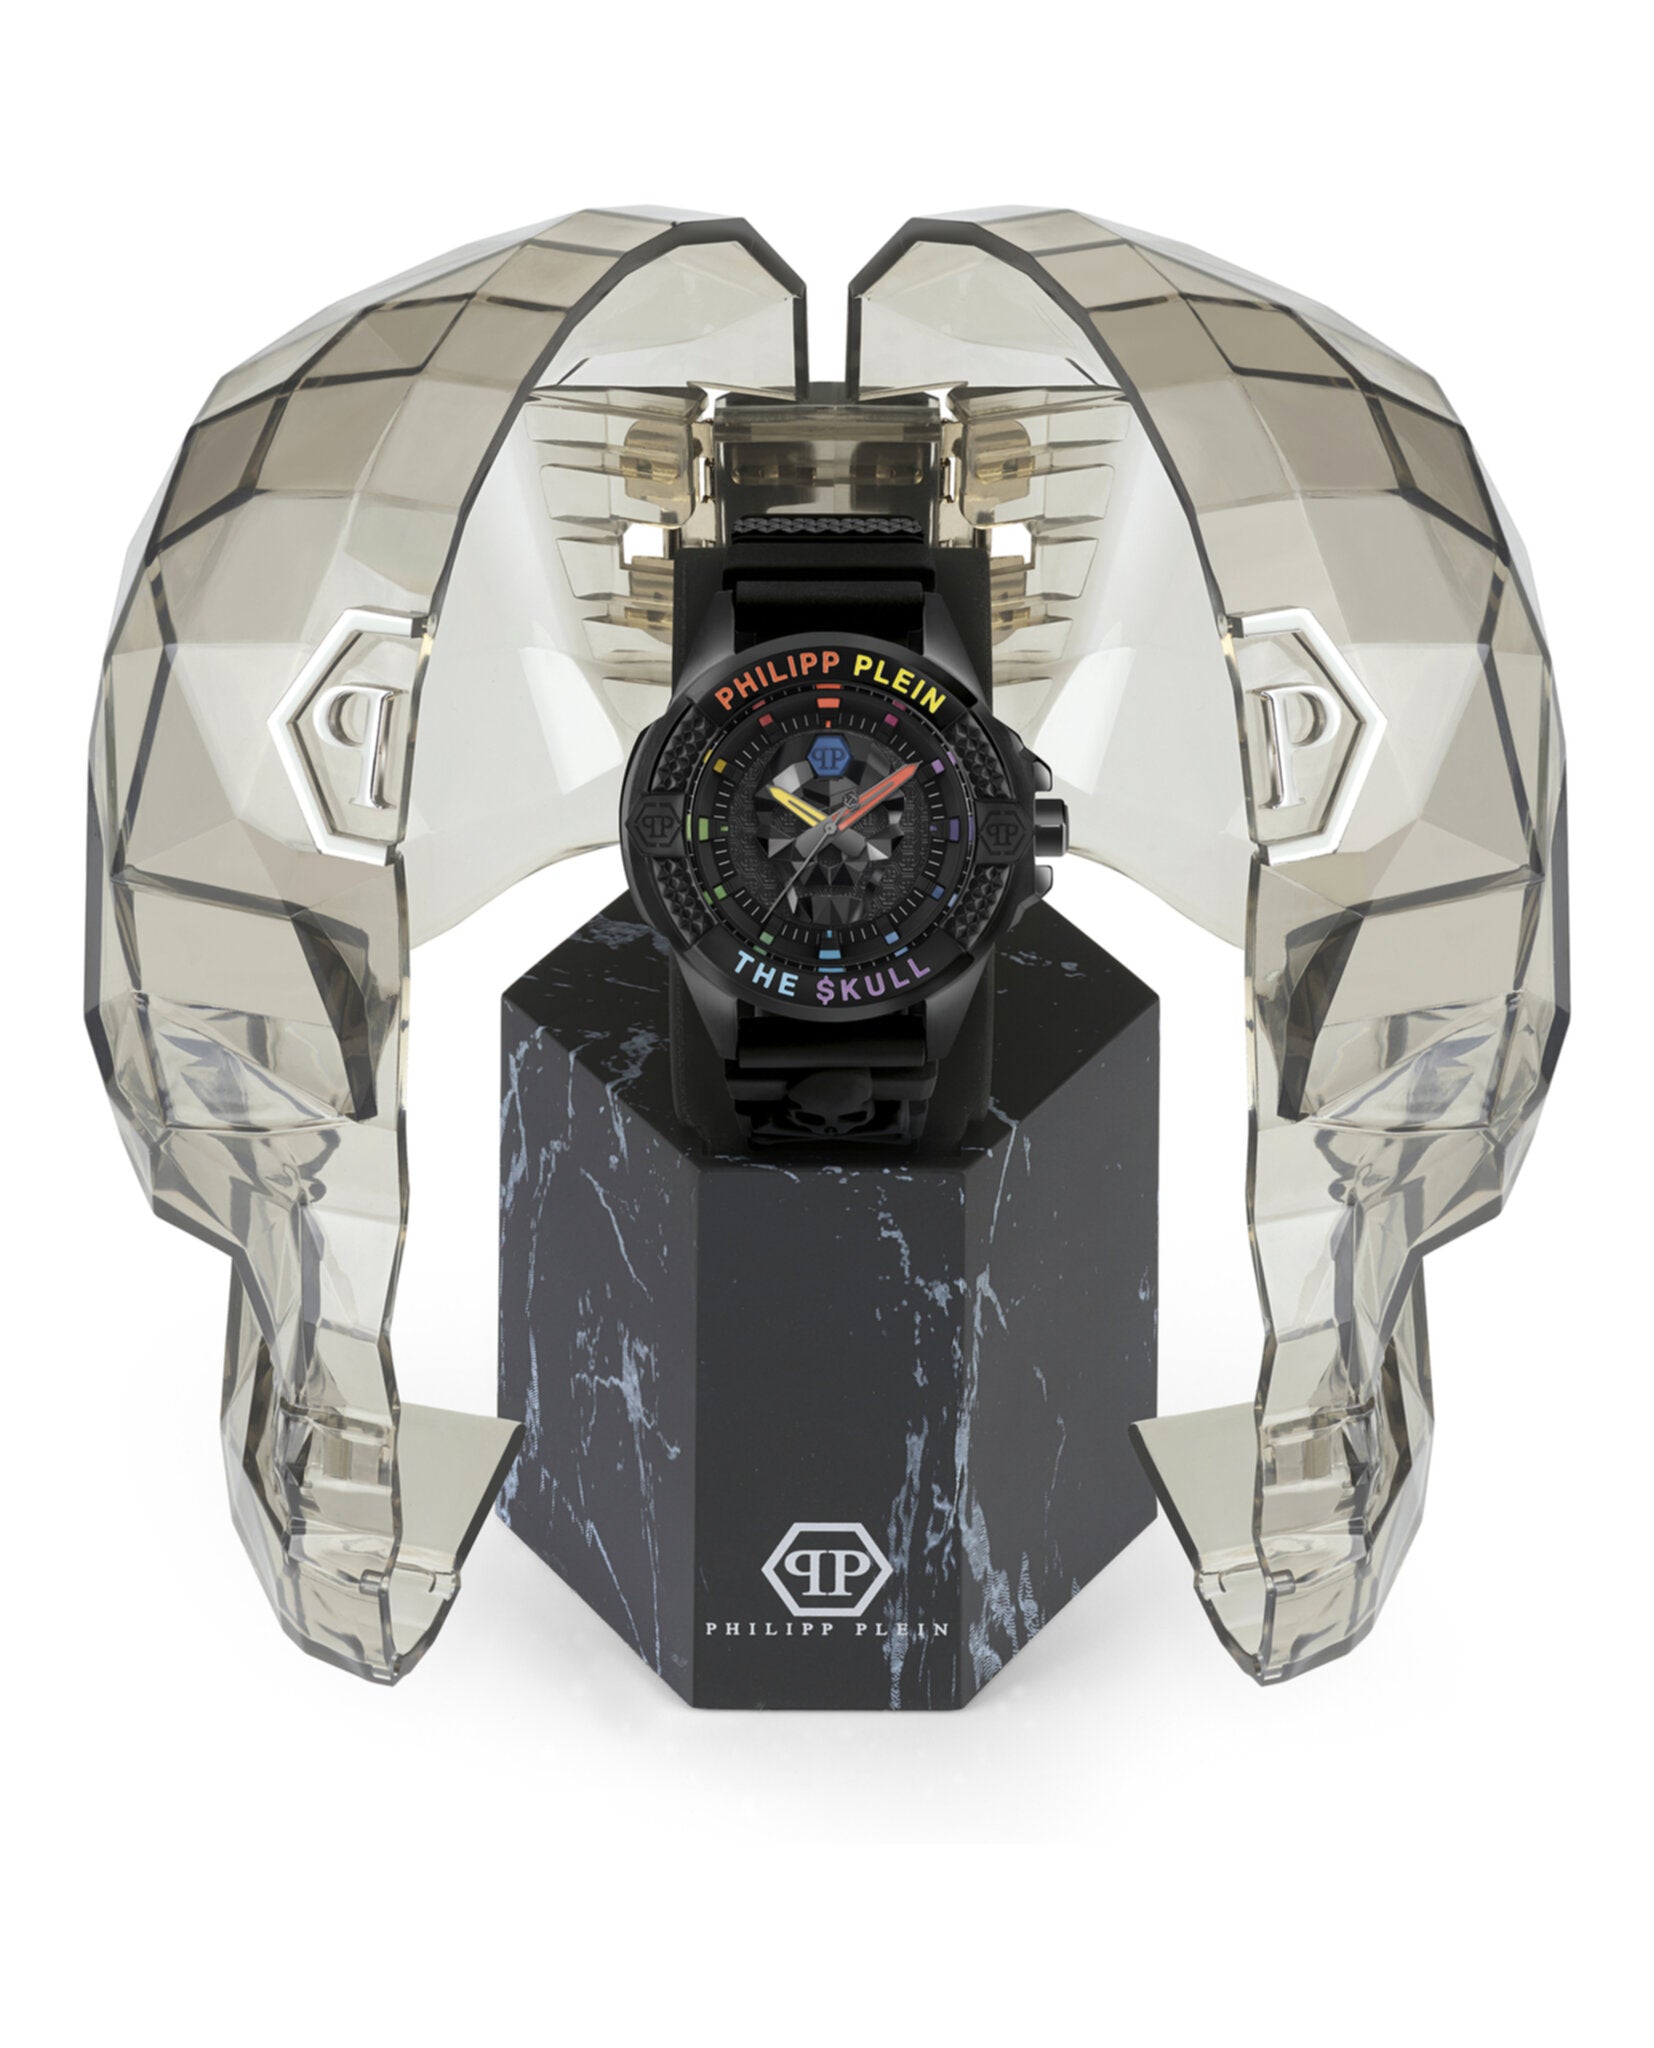 The $kull Crystal Watch